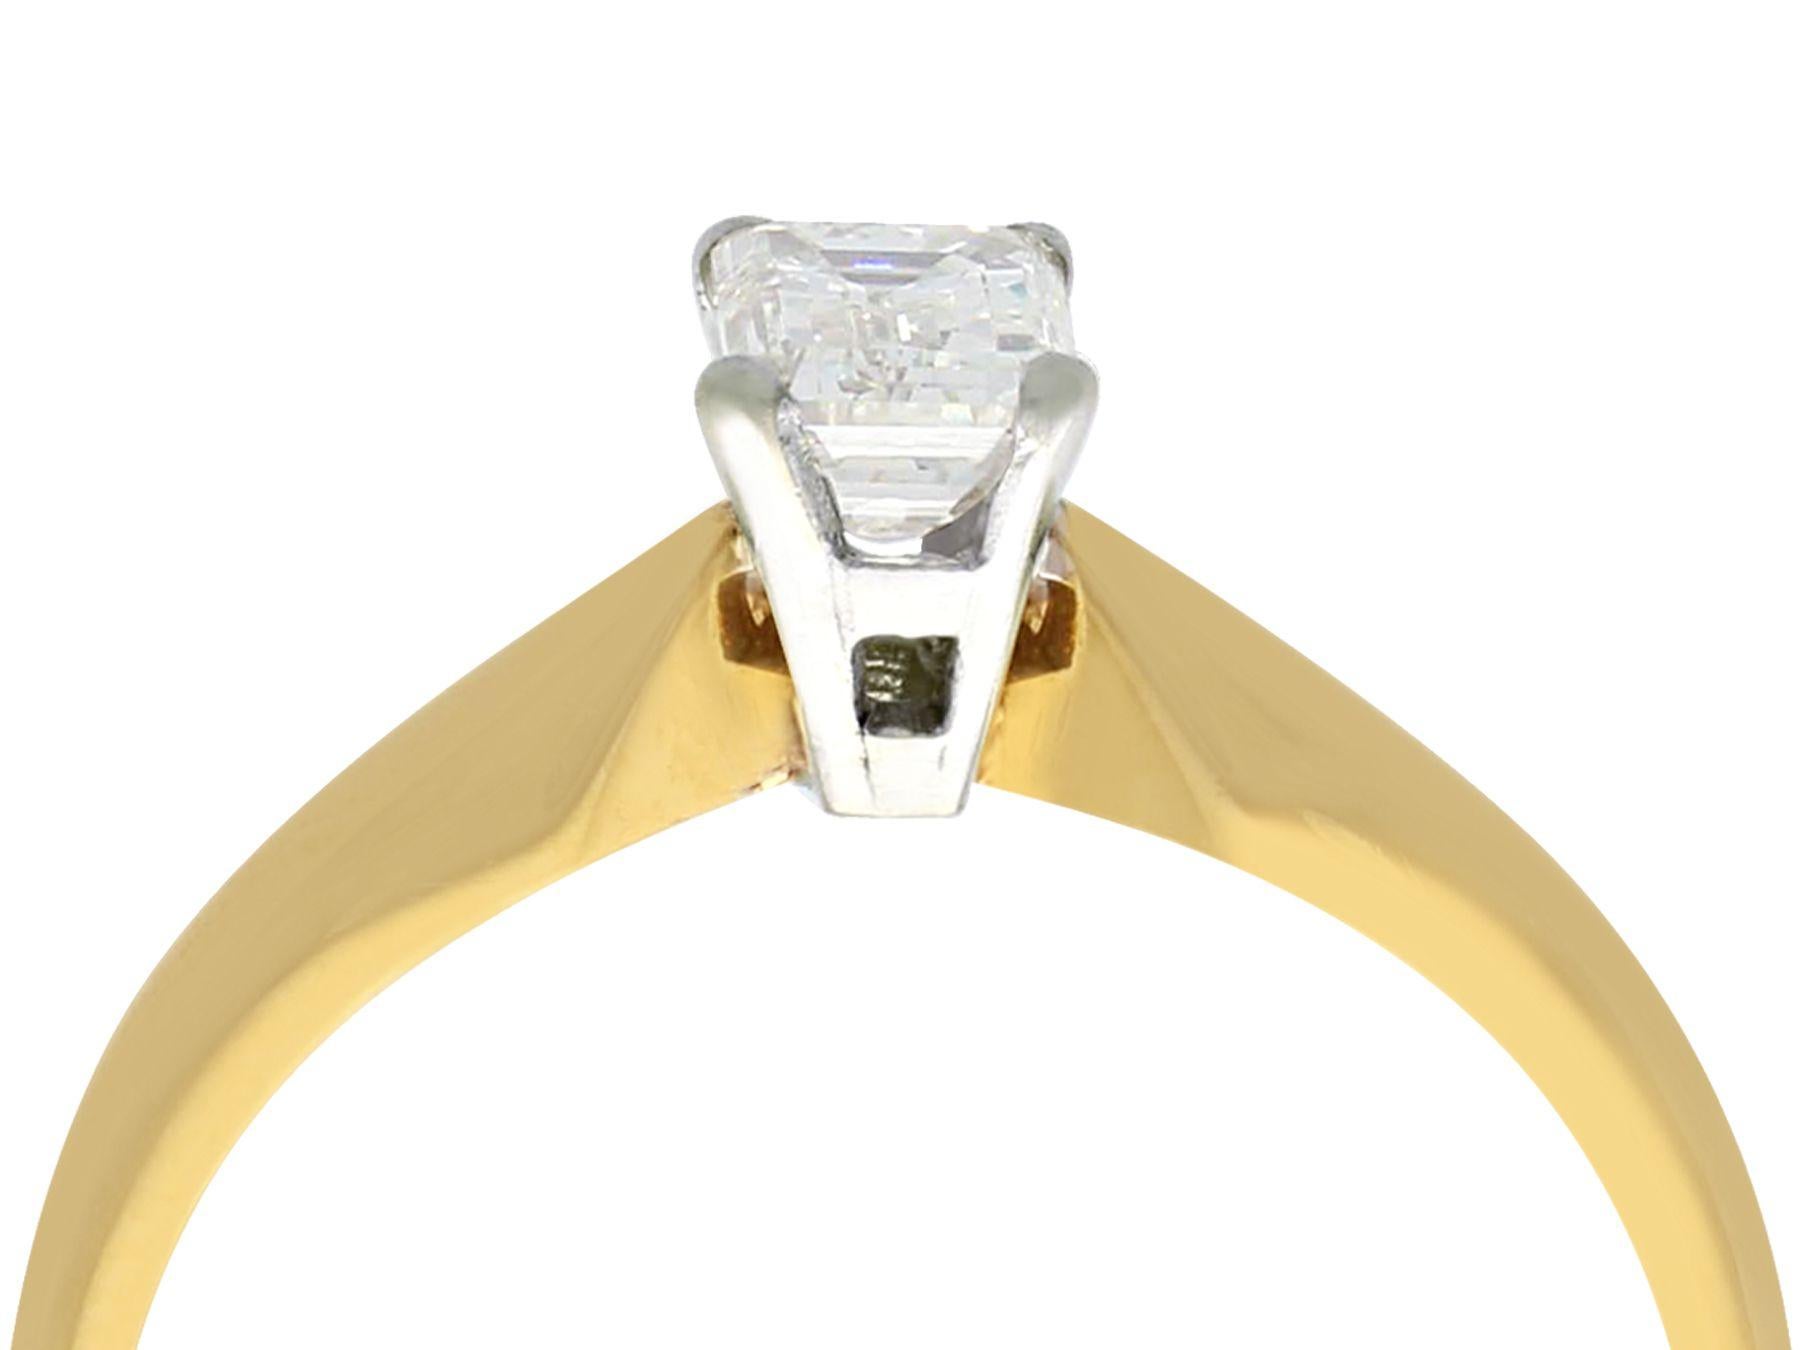 A fine 0.59 carat emerald cut diamond, 18k yellow gold, platinum set solitaire ring; part of our diverse diamond jewelry collection

This fine contemporary diamond ring has been crafted in 18k yellow gold.

The ring displays a four claw / prong